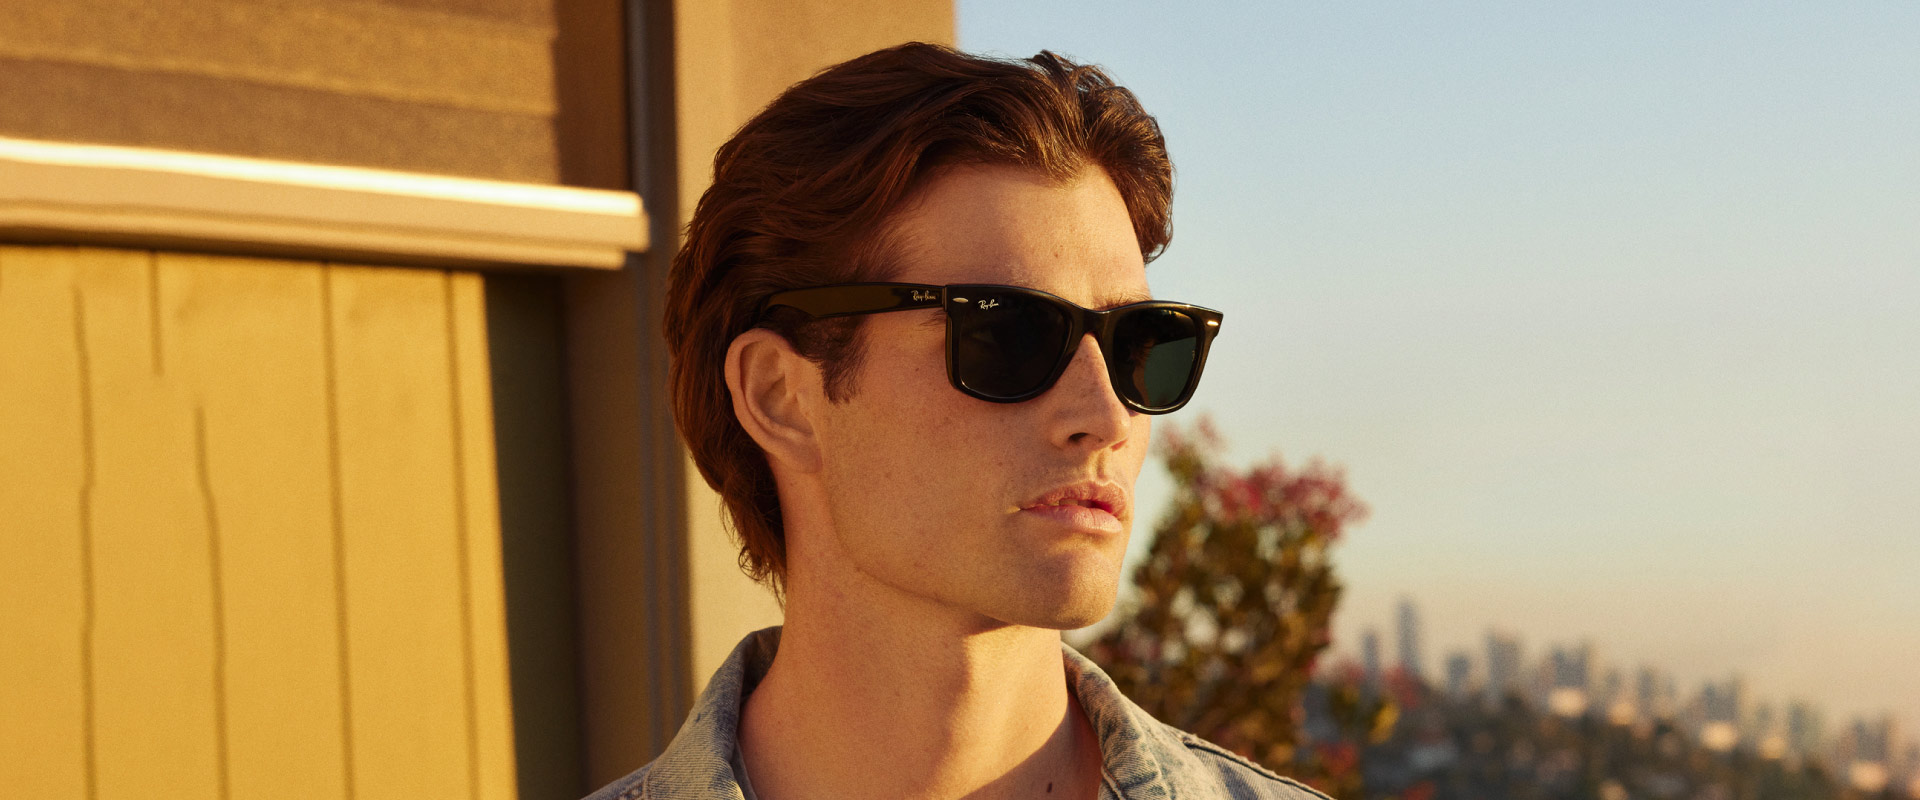 Why Cheap Sunglasses Are Dangerous for Your Eyes | NVISION